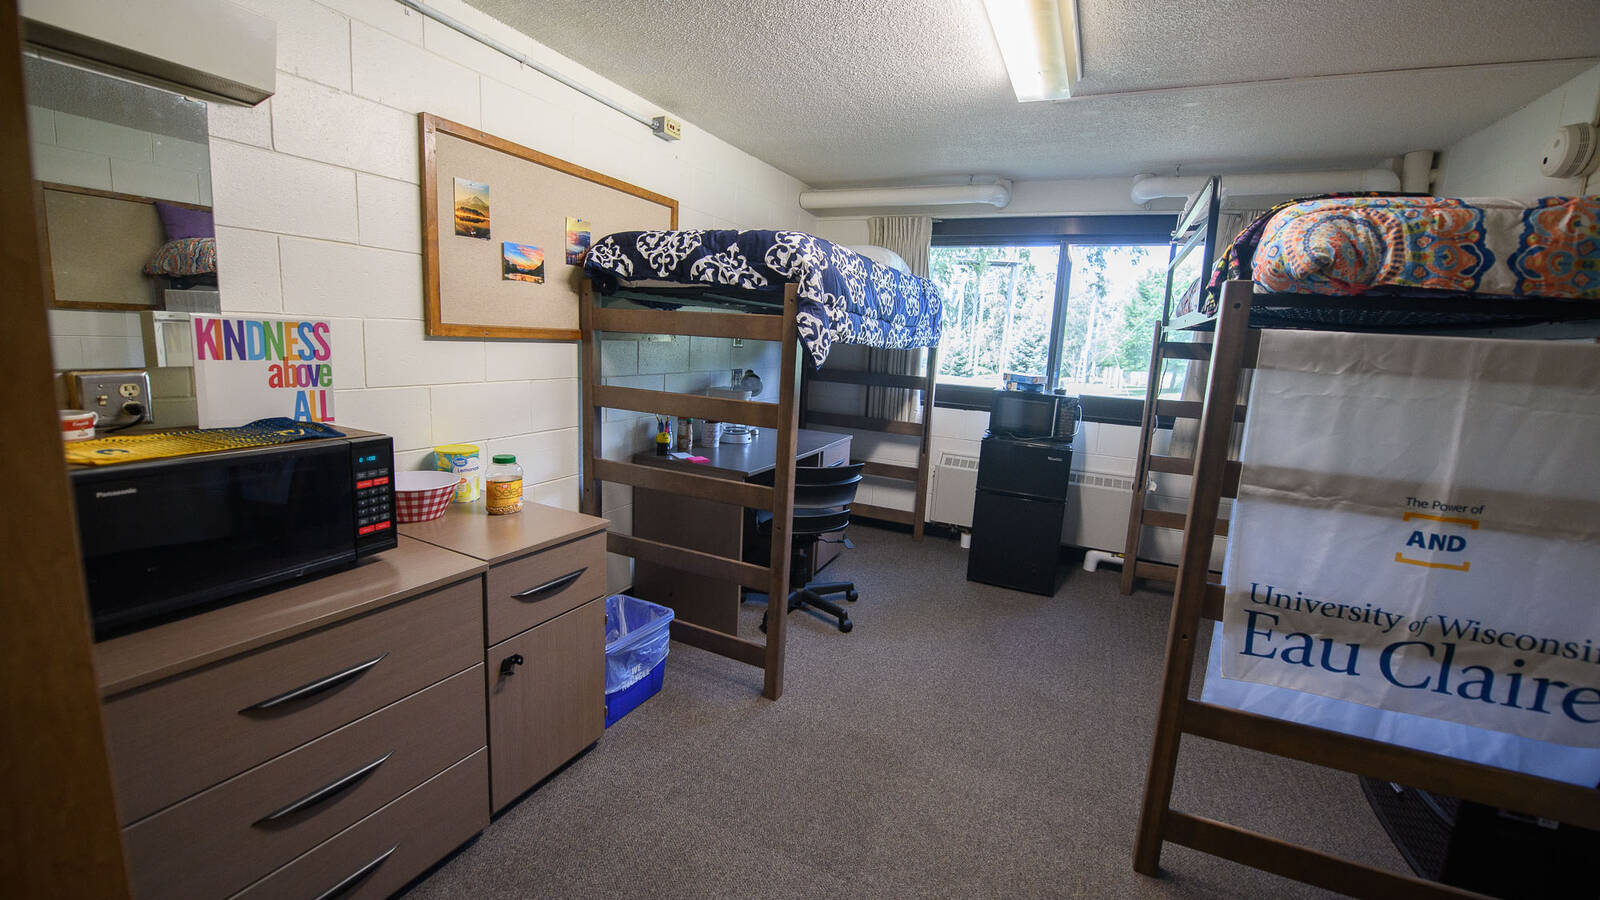 A double dorm room showing two lofted beds, a desk, a dresser and mini fridge